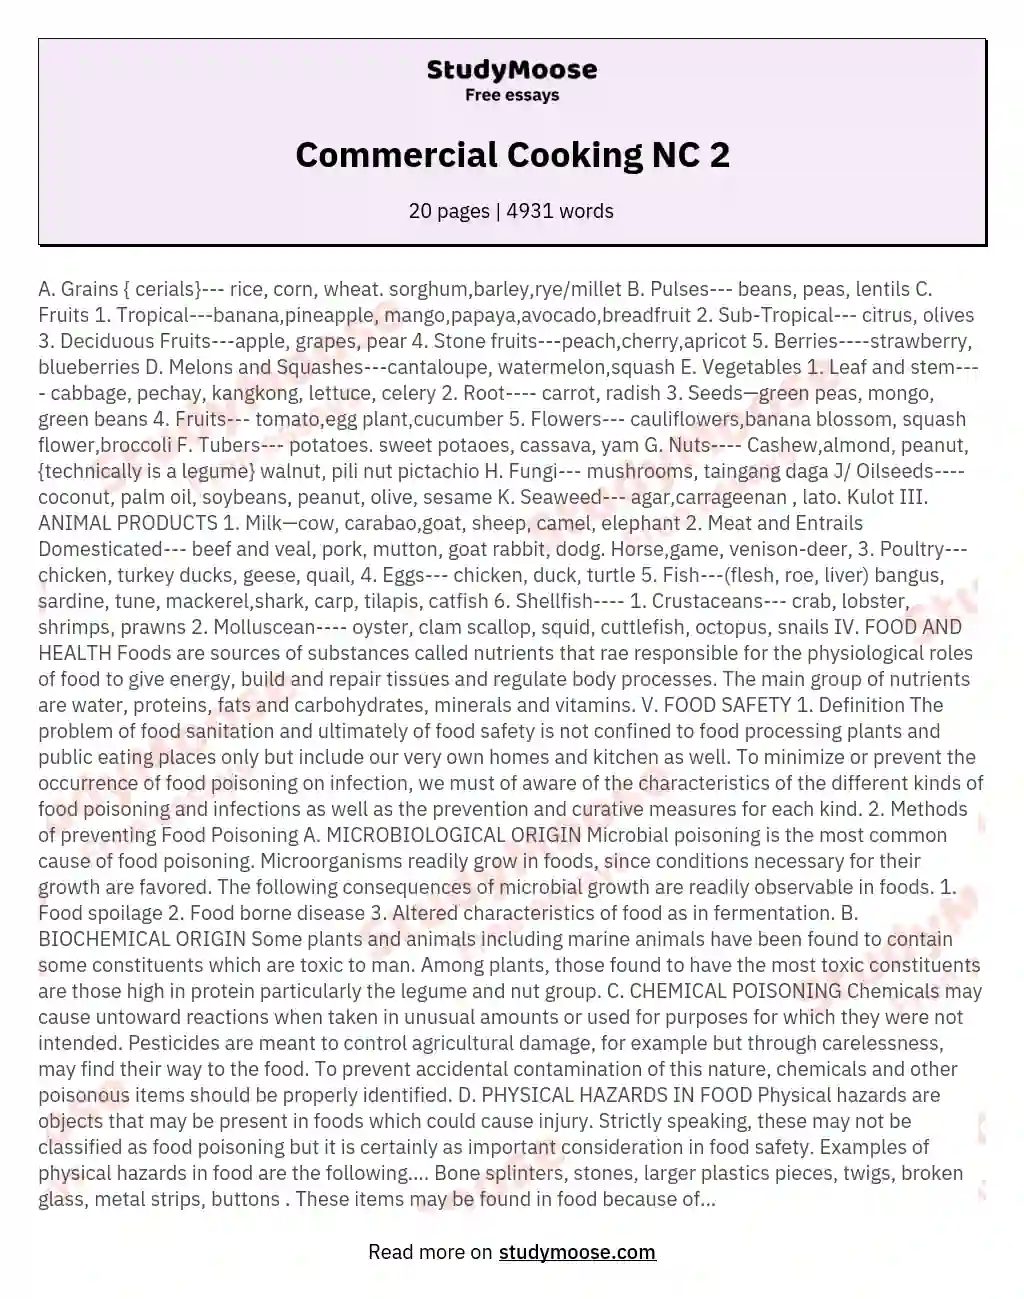 Commercial Cooking NC 2 essay